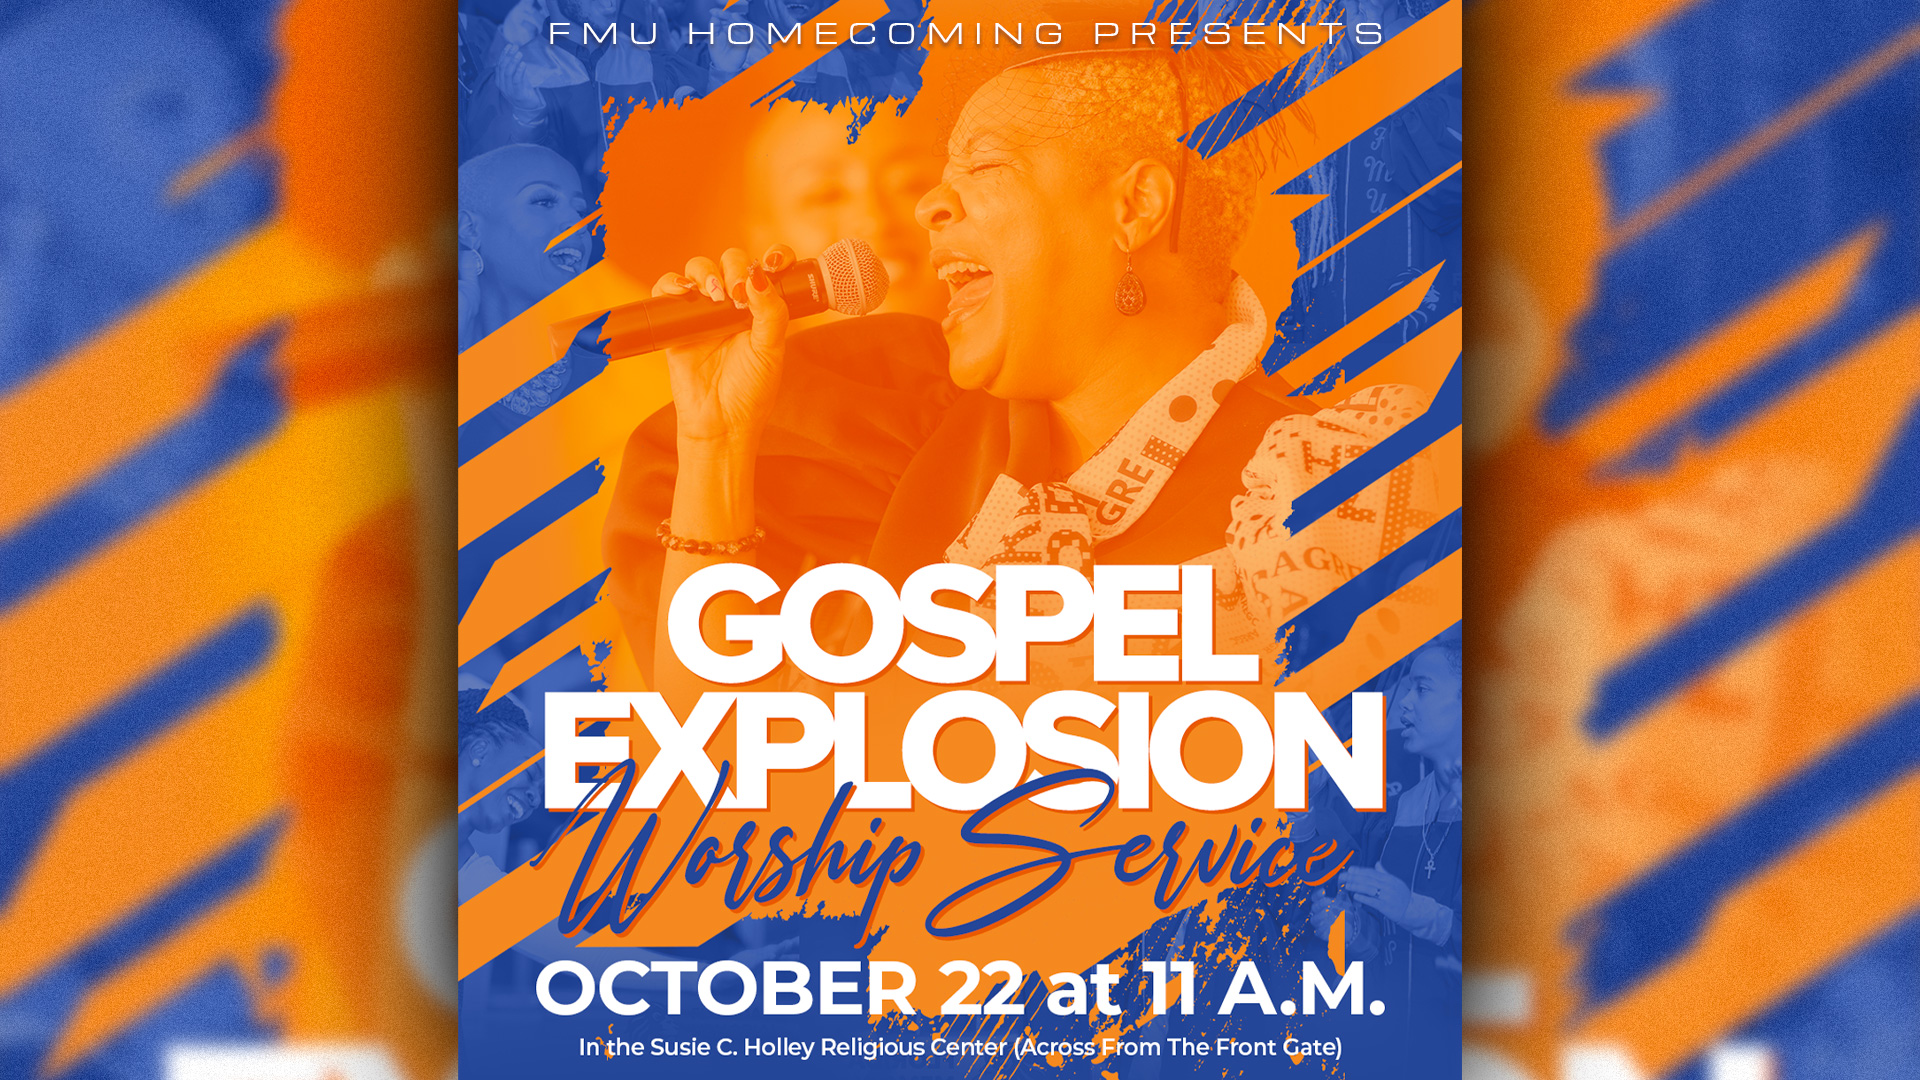 Gospel Explosion Worship Service on Sunday, October 22 at 11 a.m. in the Susie C. Holley Religious Center across from the front gate